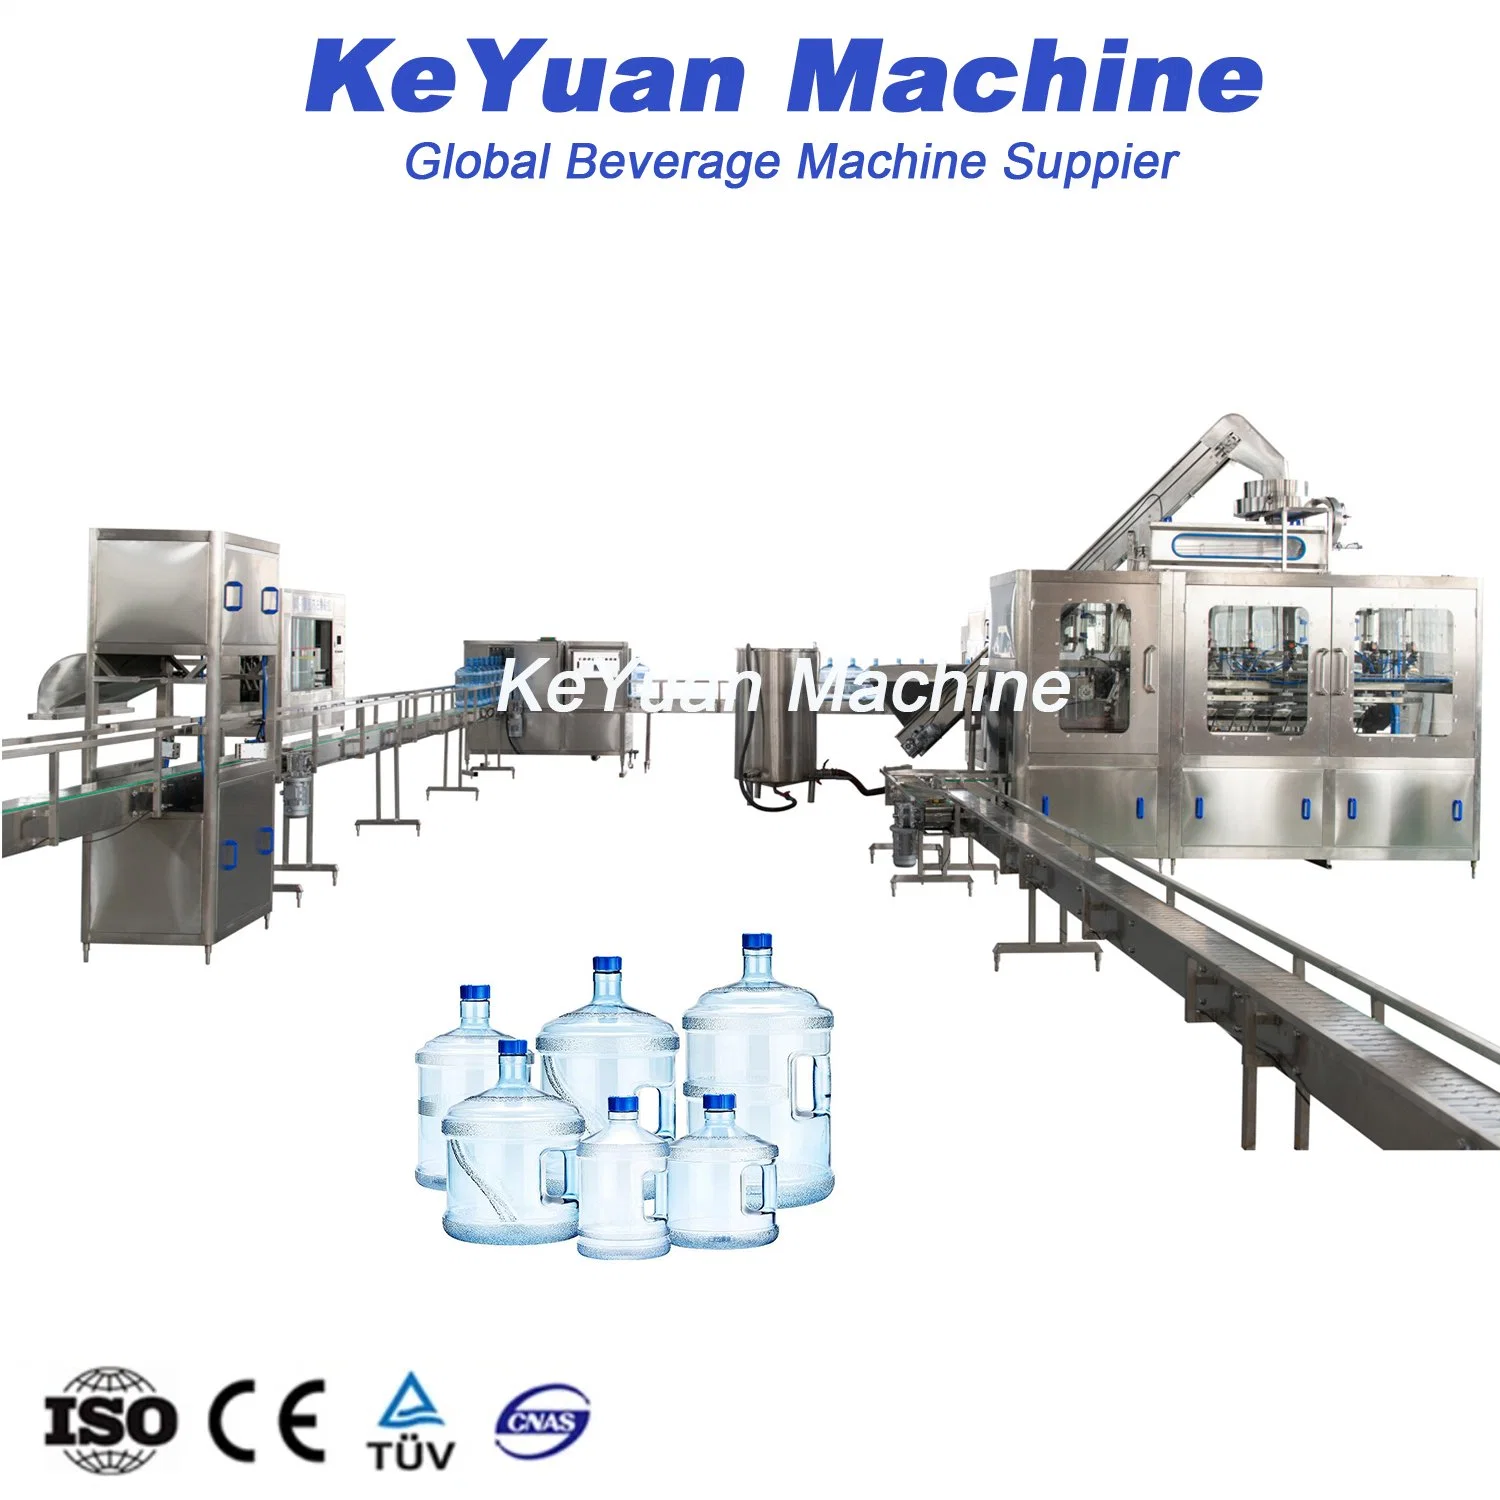 Automatic Pure Mineral Drinking Water 3 to 5 Gallon Bottle Filling Machine Bottling Plant Production Line for 12L / 15L / 20L Dispenser Barrel